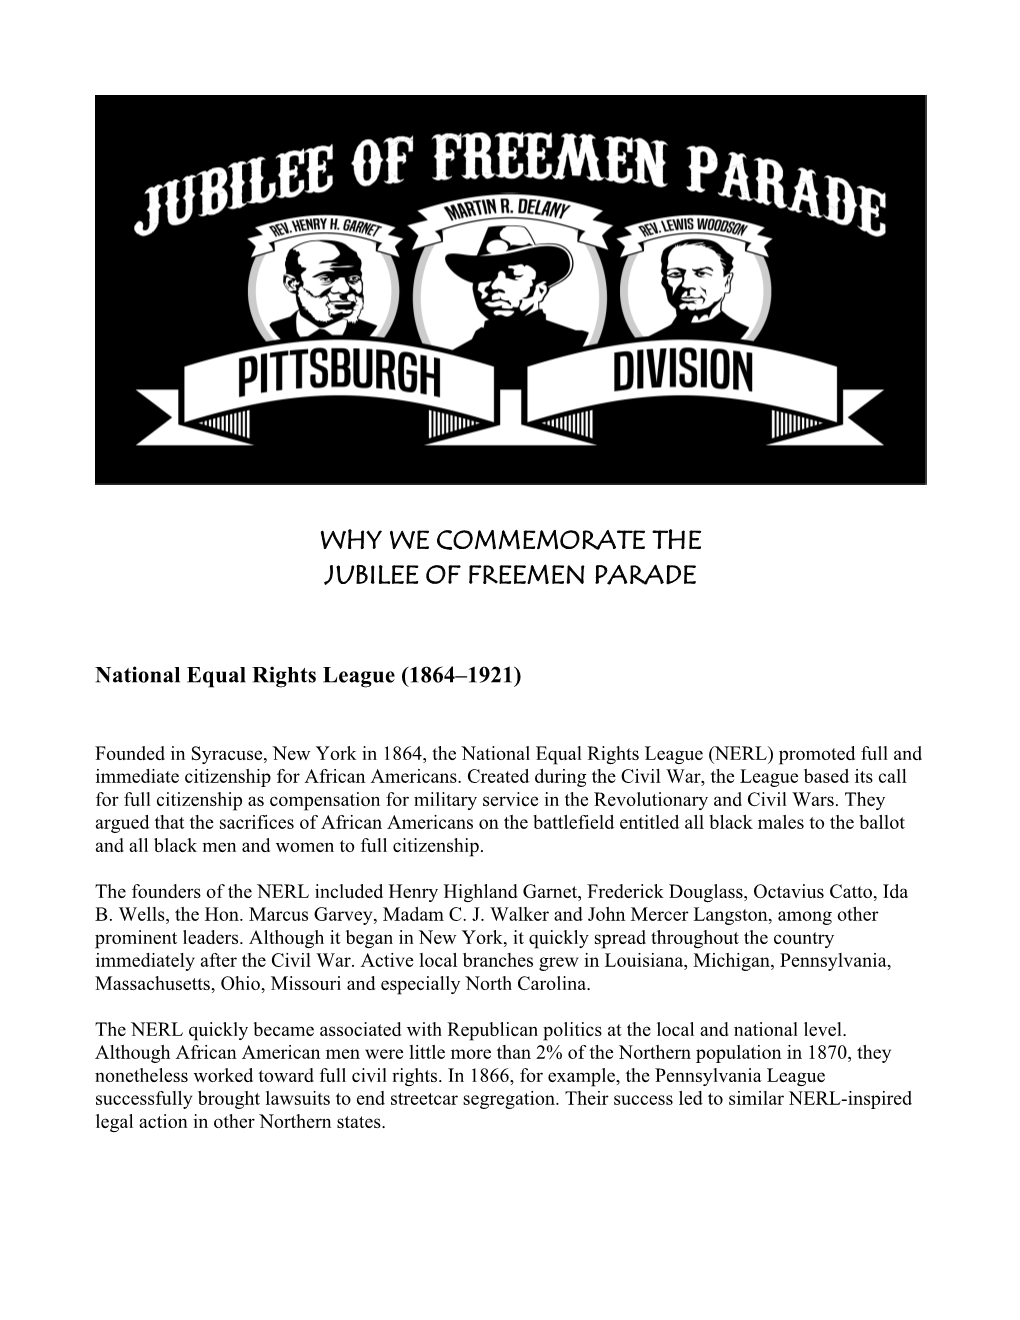 Why We Commemorate the Jubilee of Freemen Parade